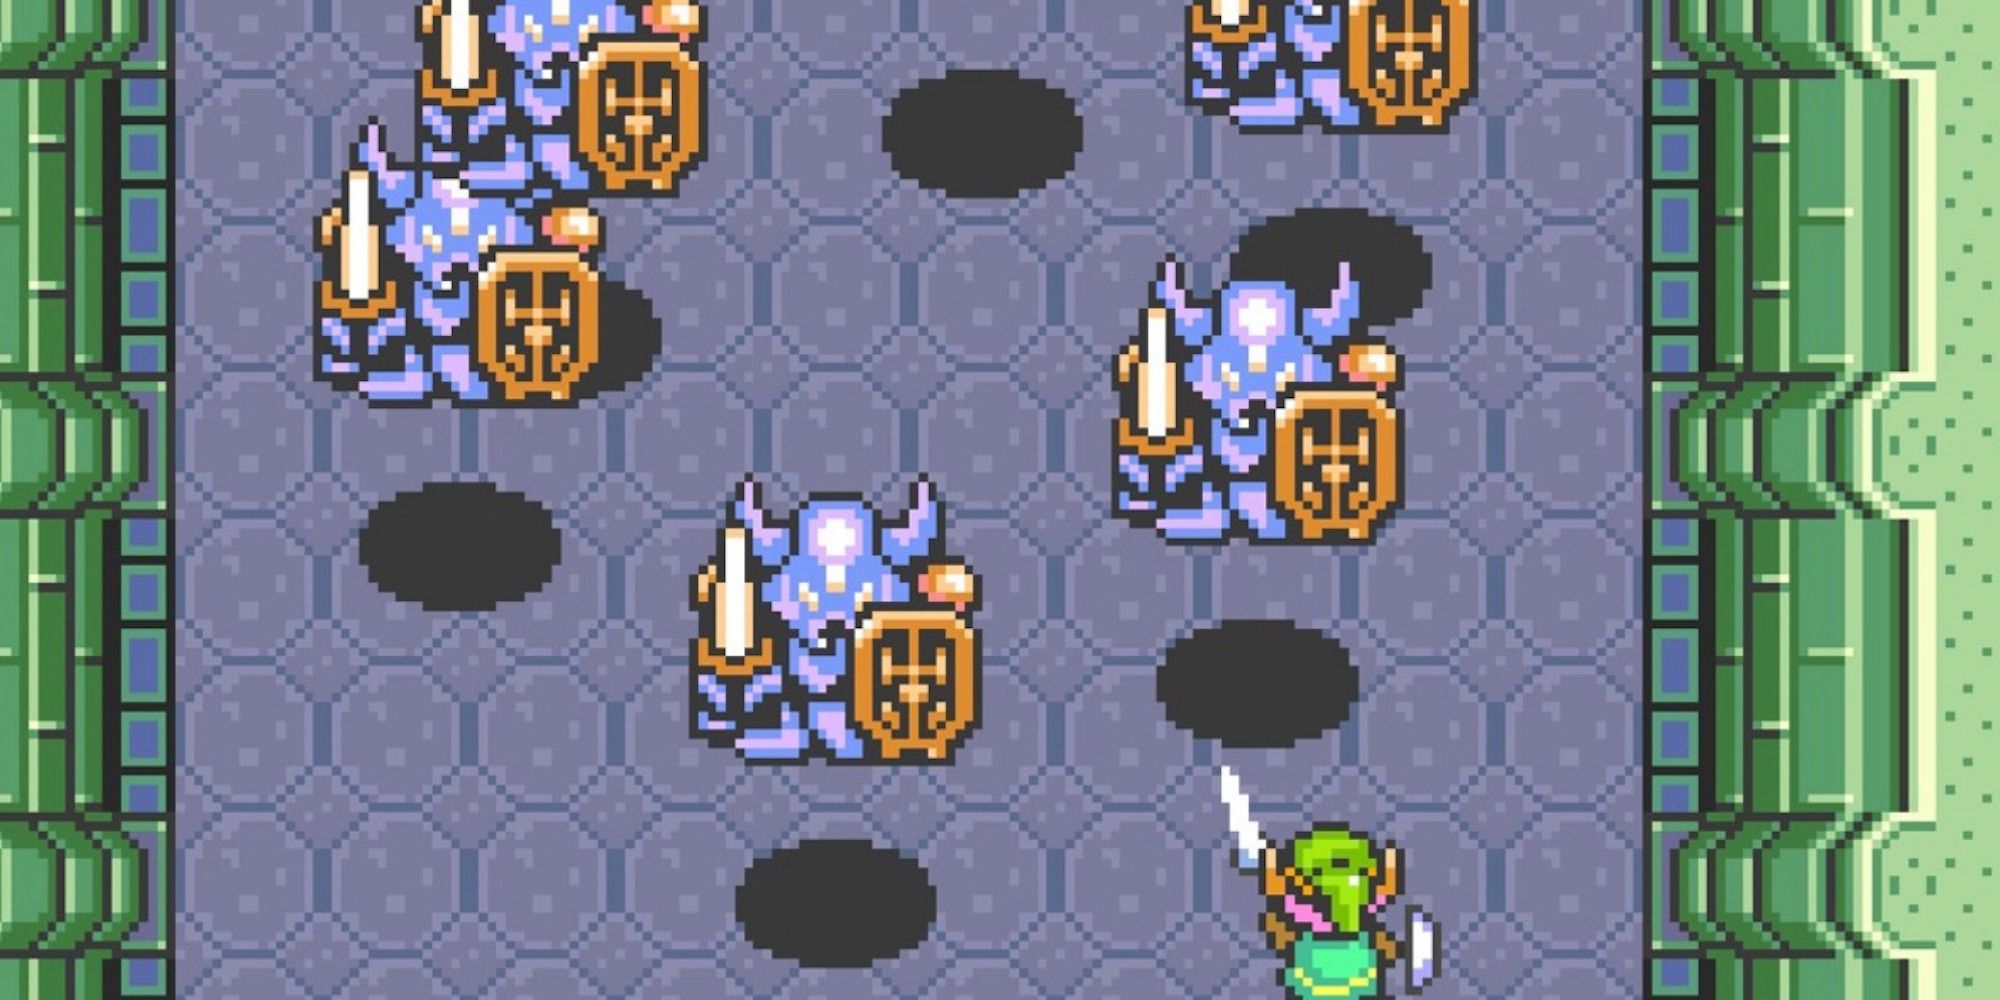 Fight a boss in The Legend Of Zelda A Link To The Past